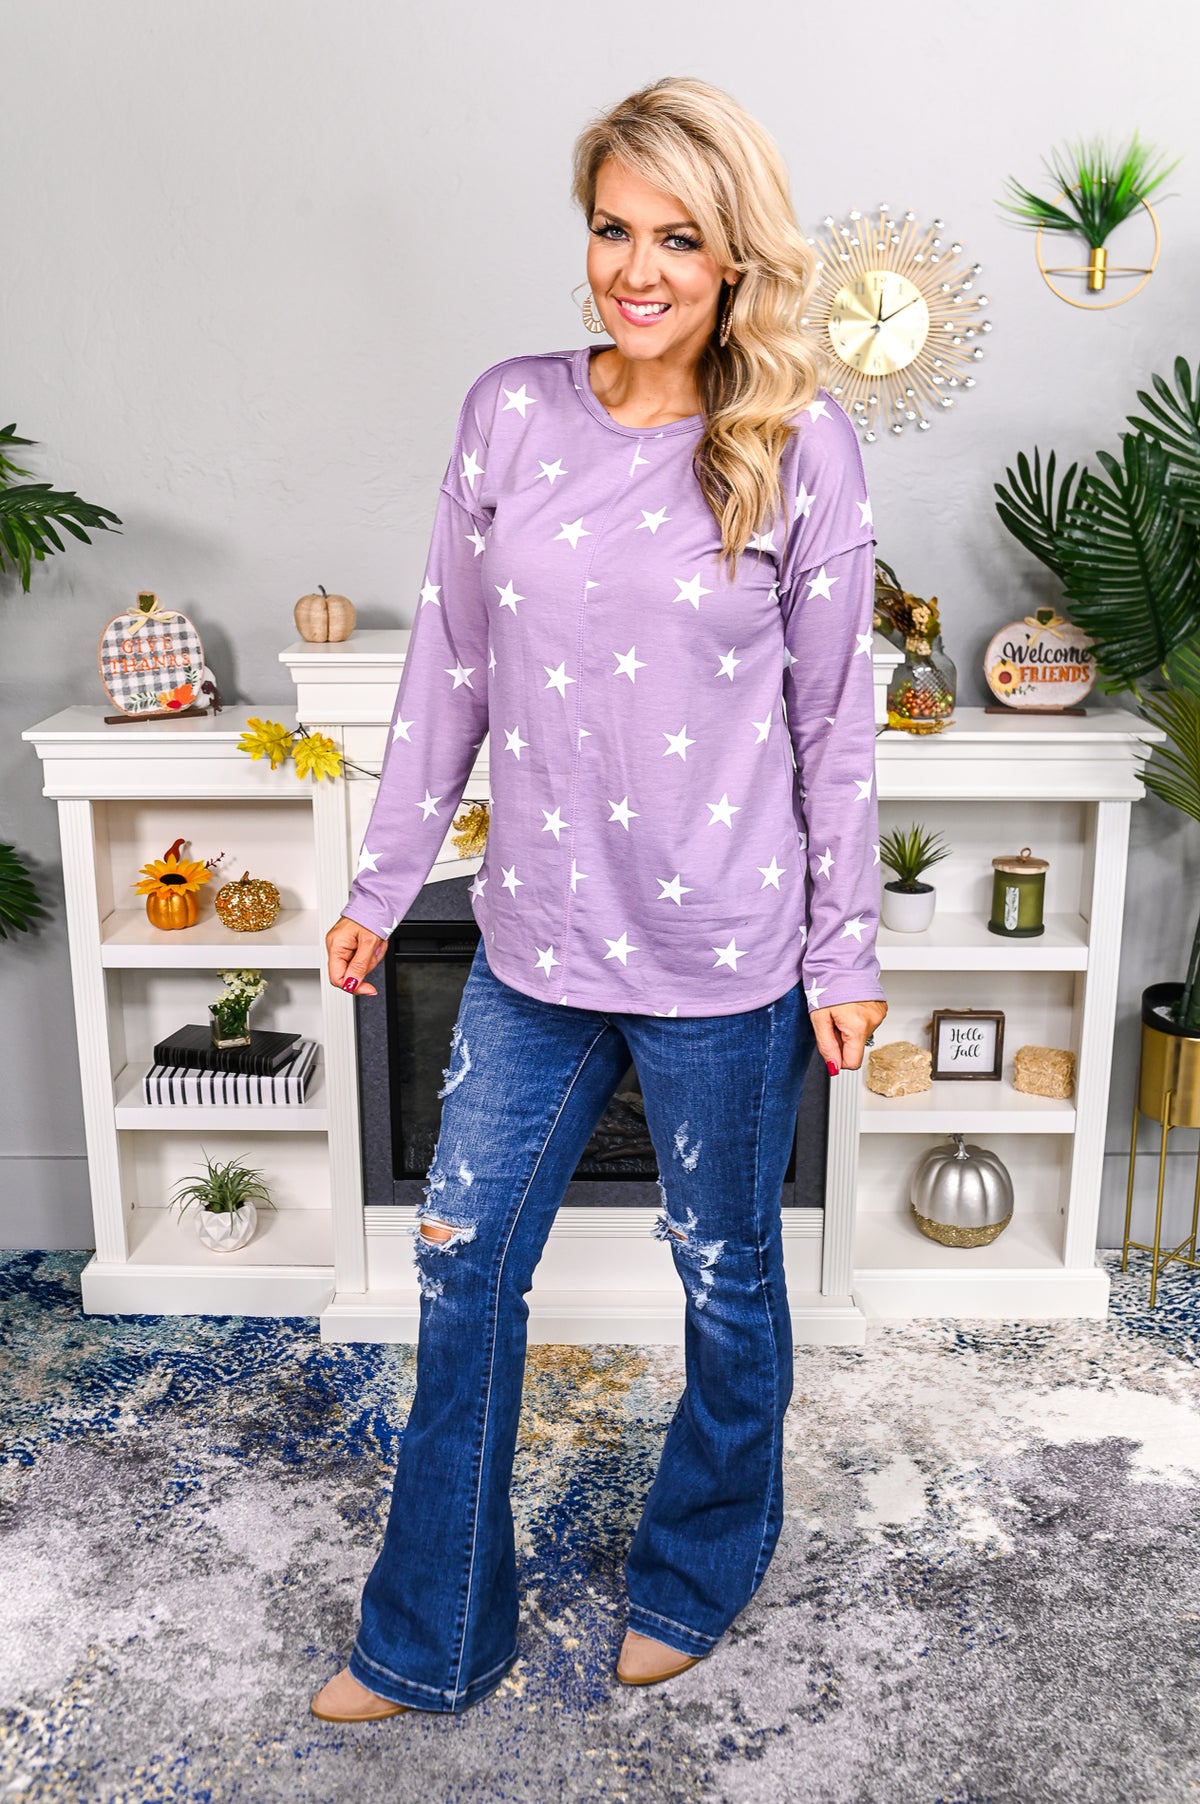 Shine Brighter Then The Stars Lavender/Ivory Star Printed Top - T5278LV